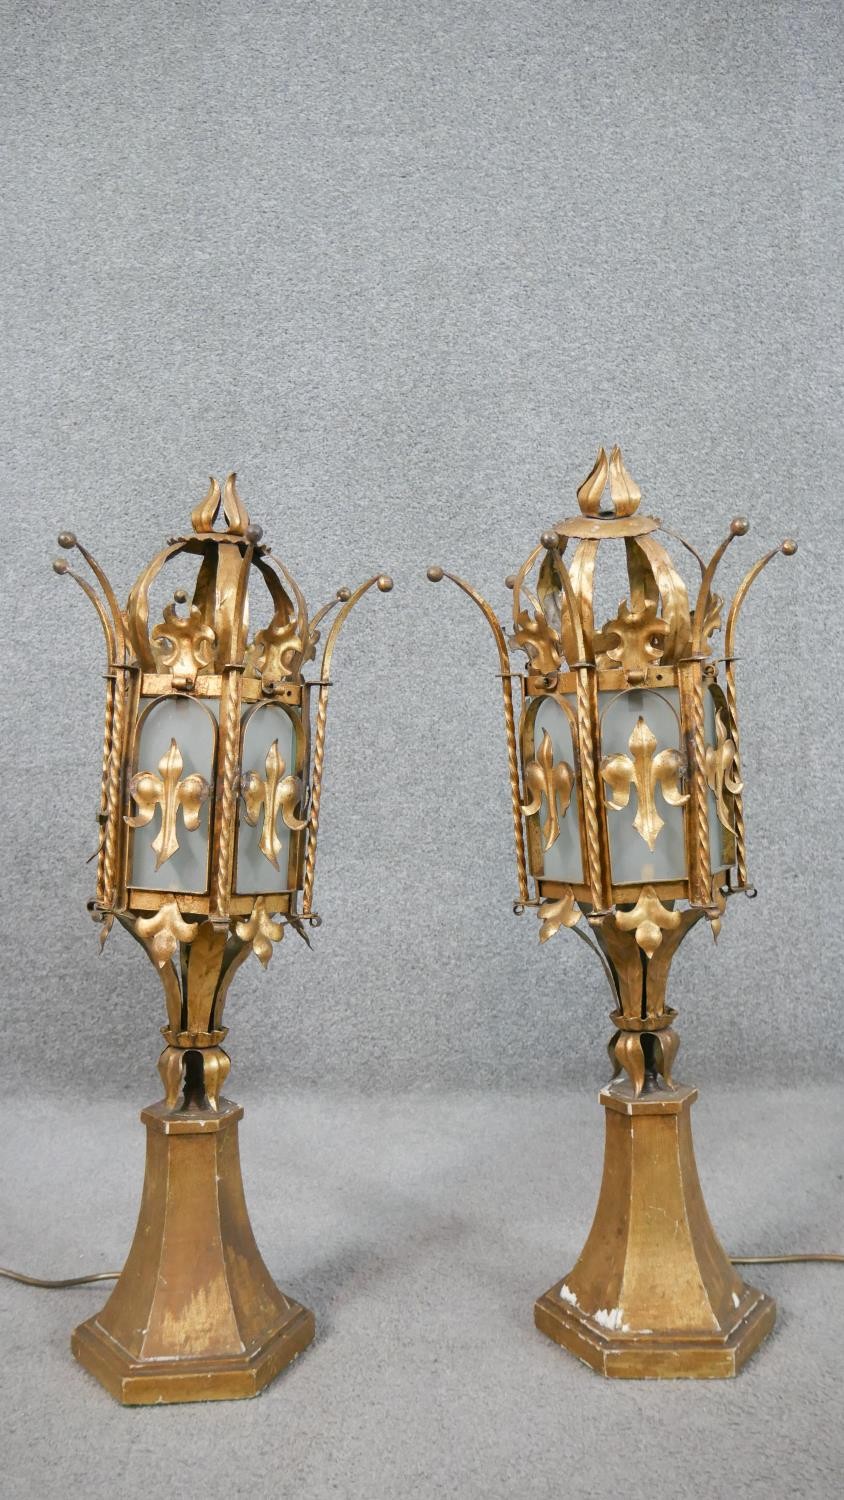 A pair of gilt metal lamps, believed to be Venetian gondola lanterns, of hexagonal section with